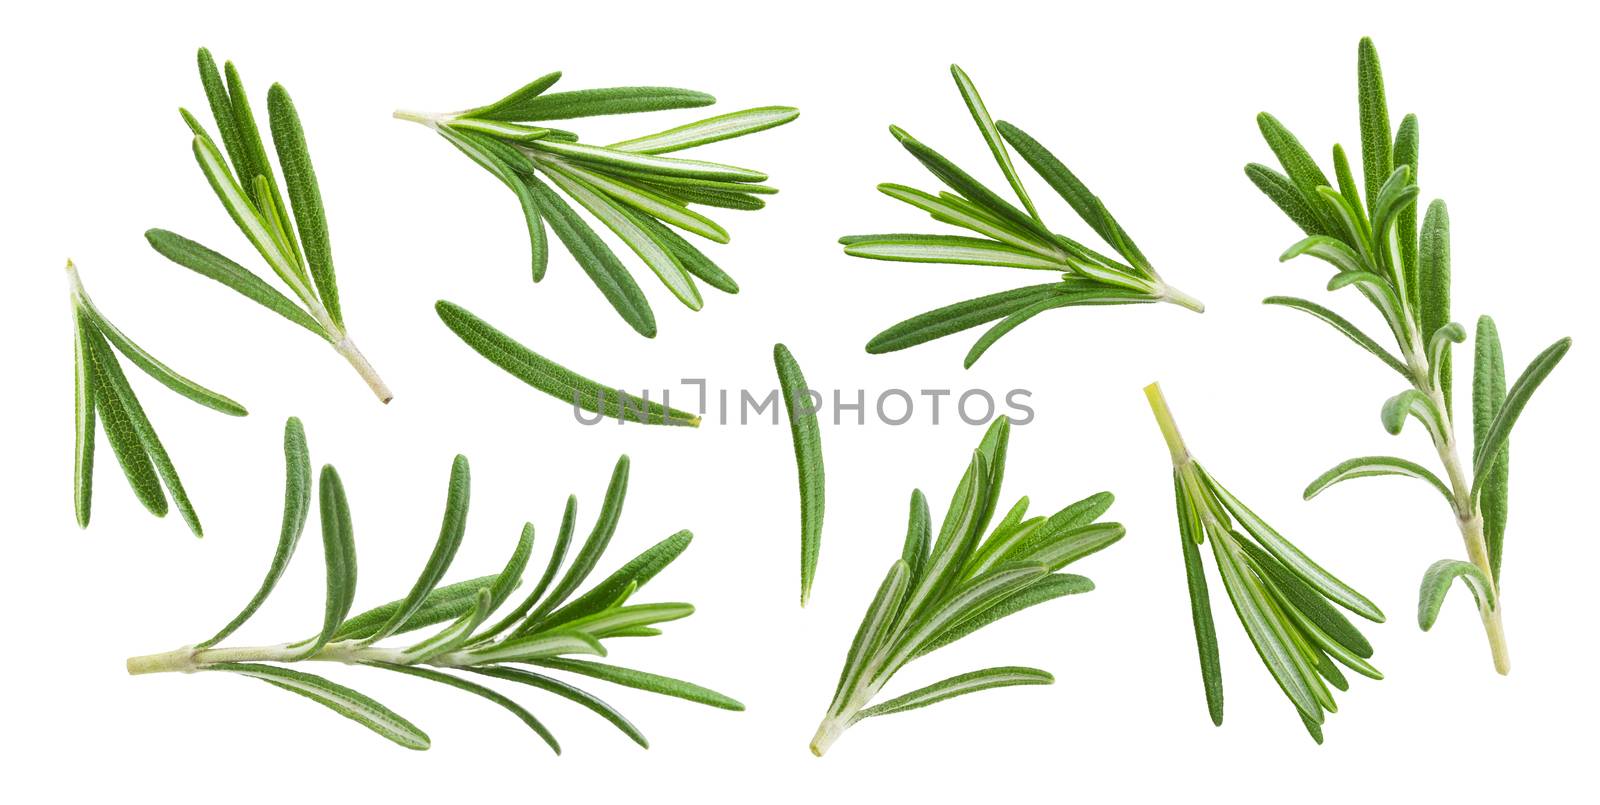 Rosemary twig and leaves isolated on white background with clipping path, close-up, collection